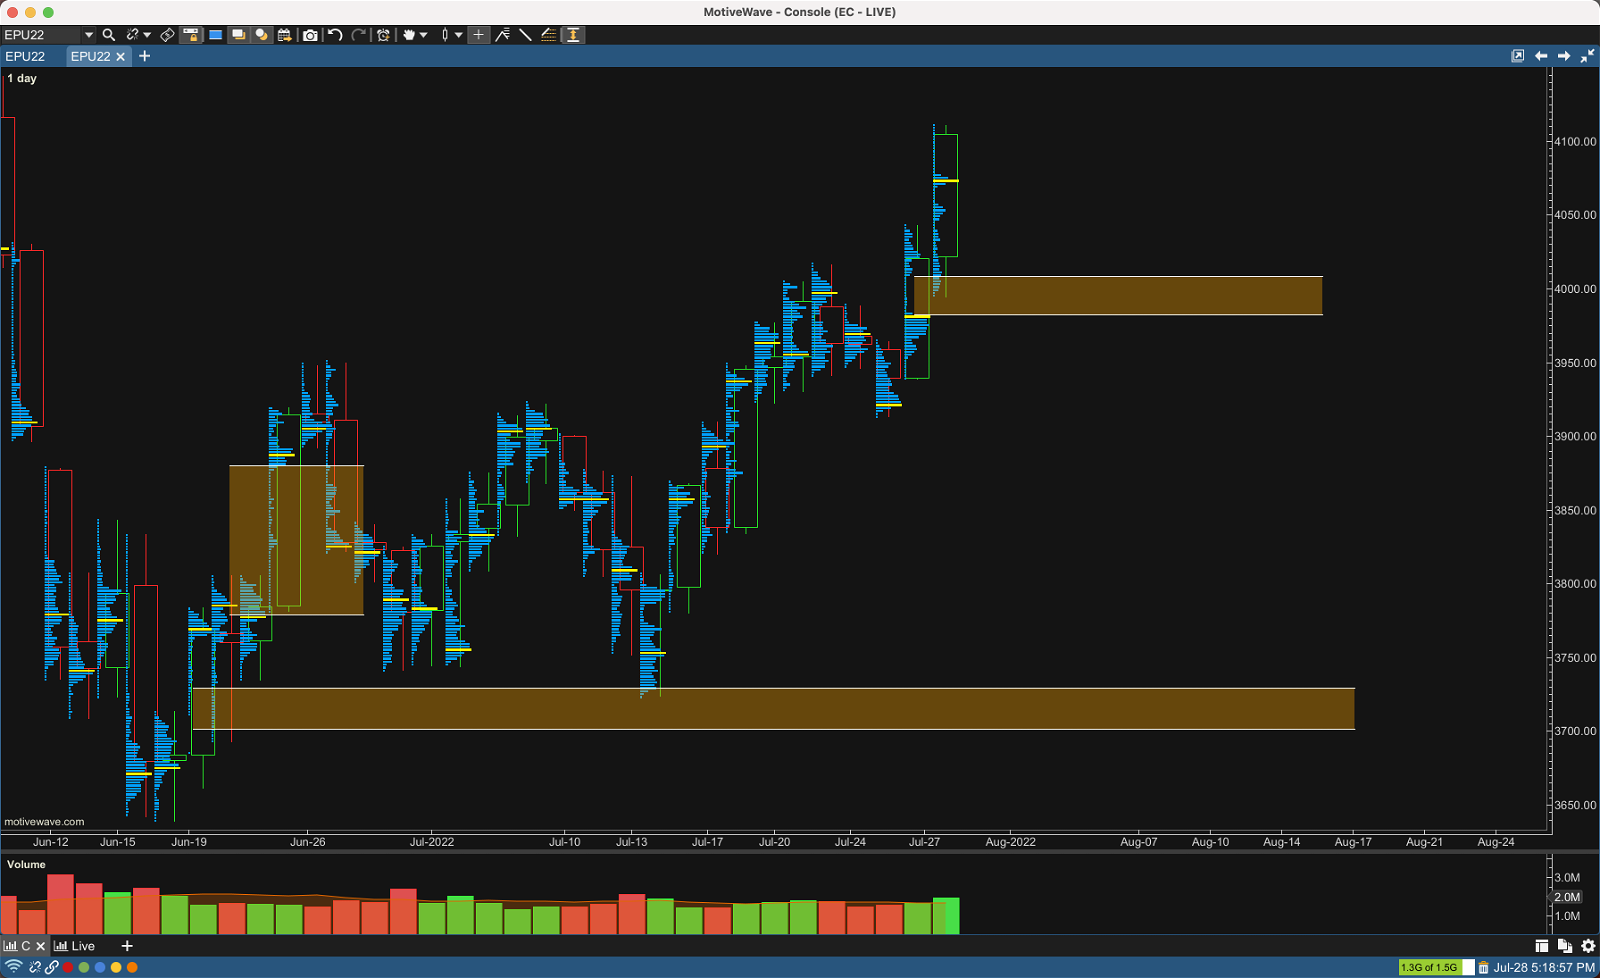 Daily Chart of eMini S&P 500 Projecting Low Volume Nodes Forward